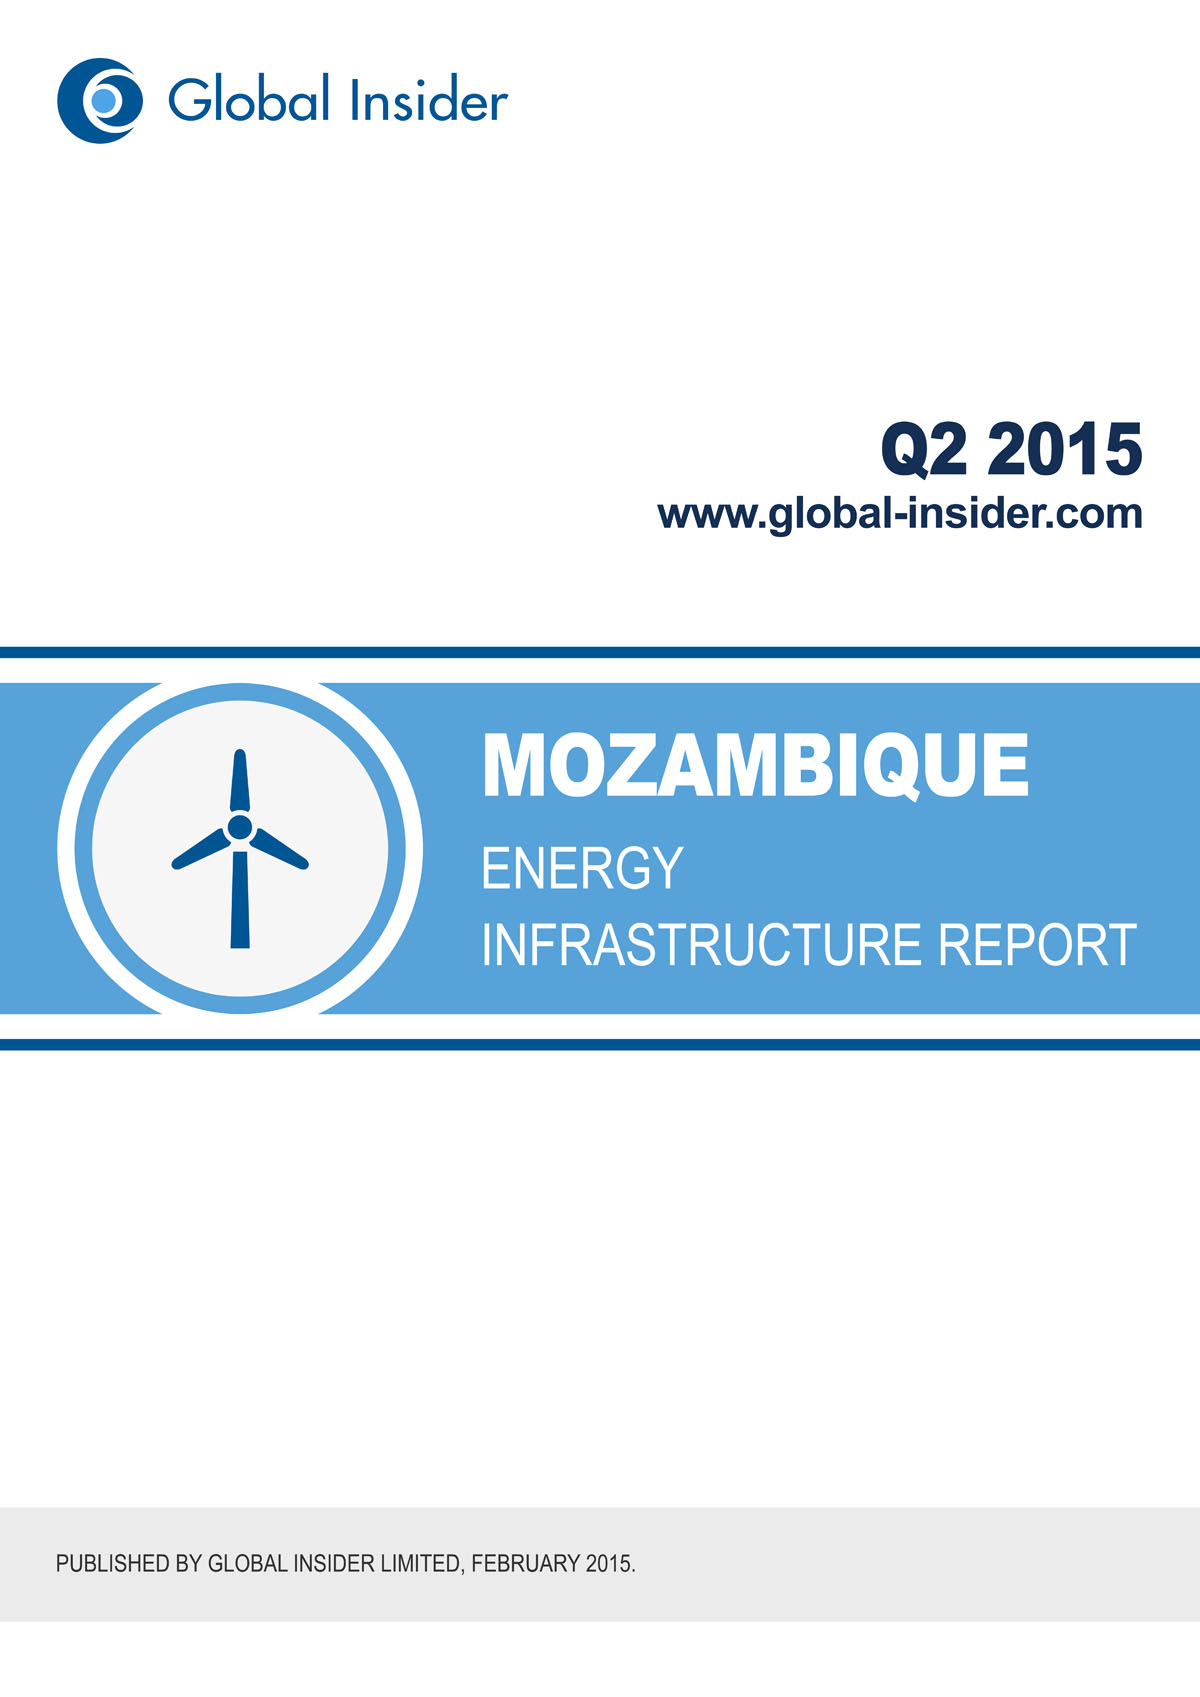 Mozambique Energy Infrastructure Report